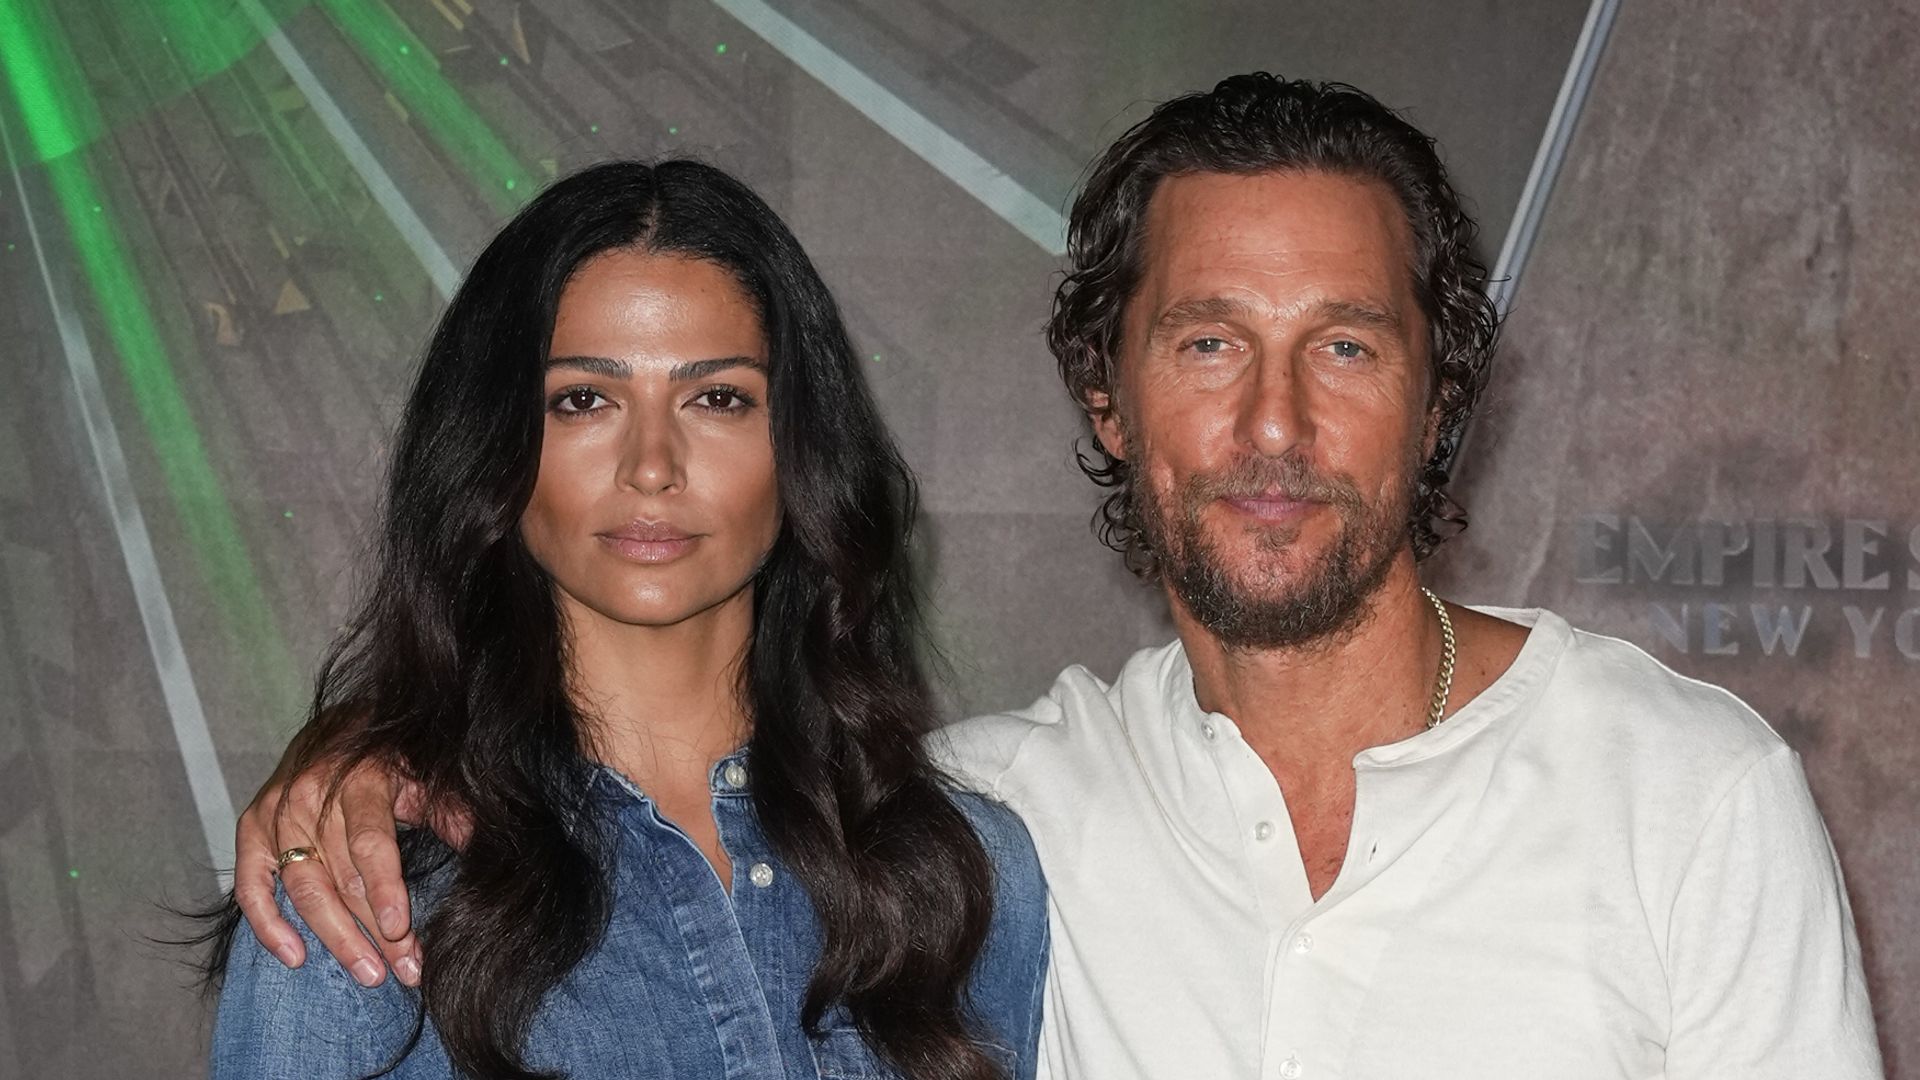 Camila Alves McConaughey and Matthew McConaughey visit the Empire State Building on September 12, 2023 in New York City.